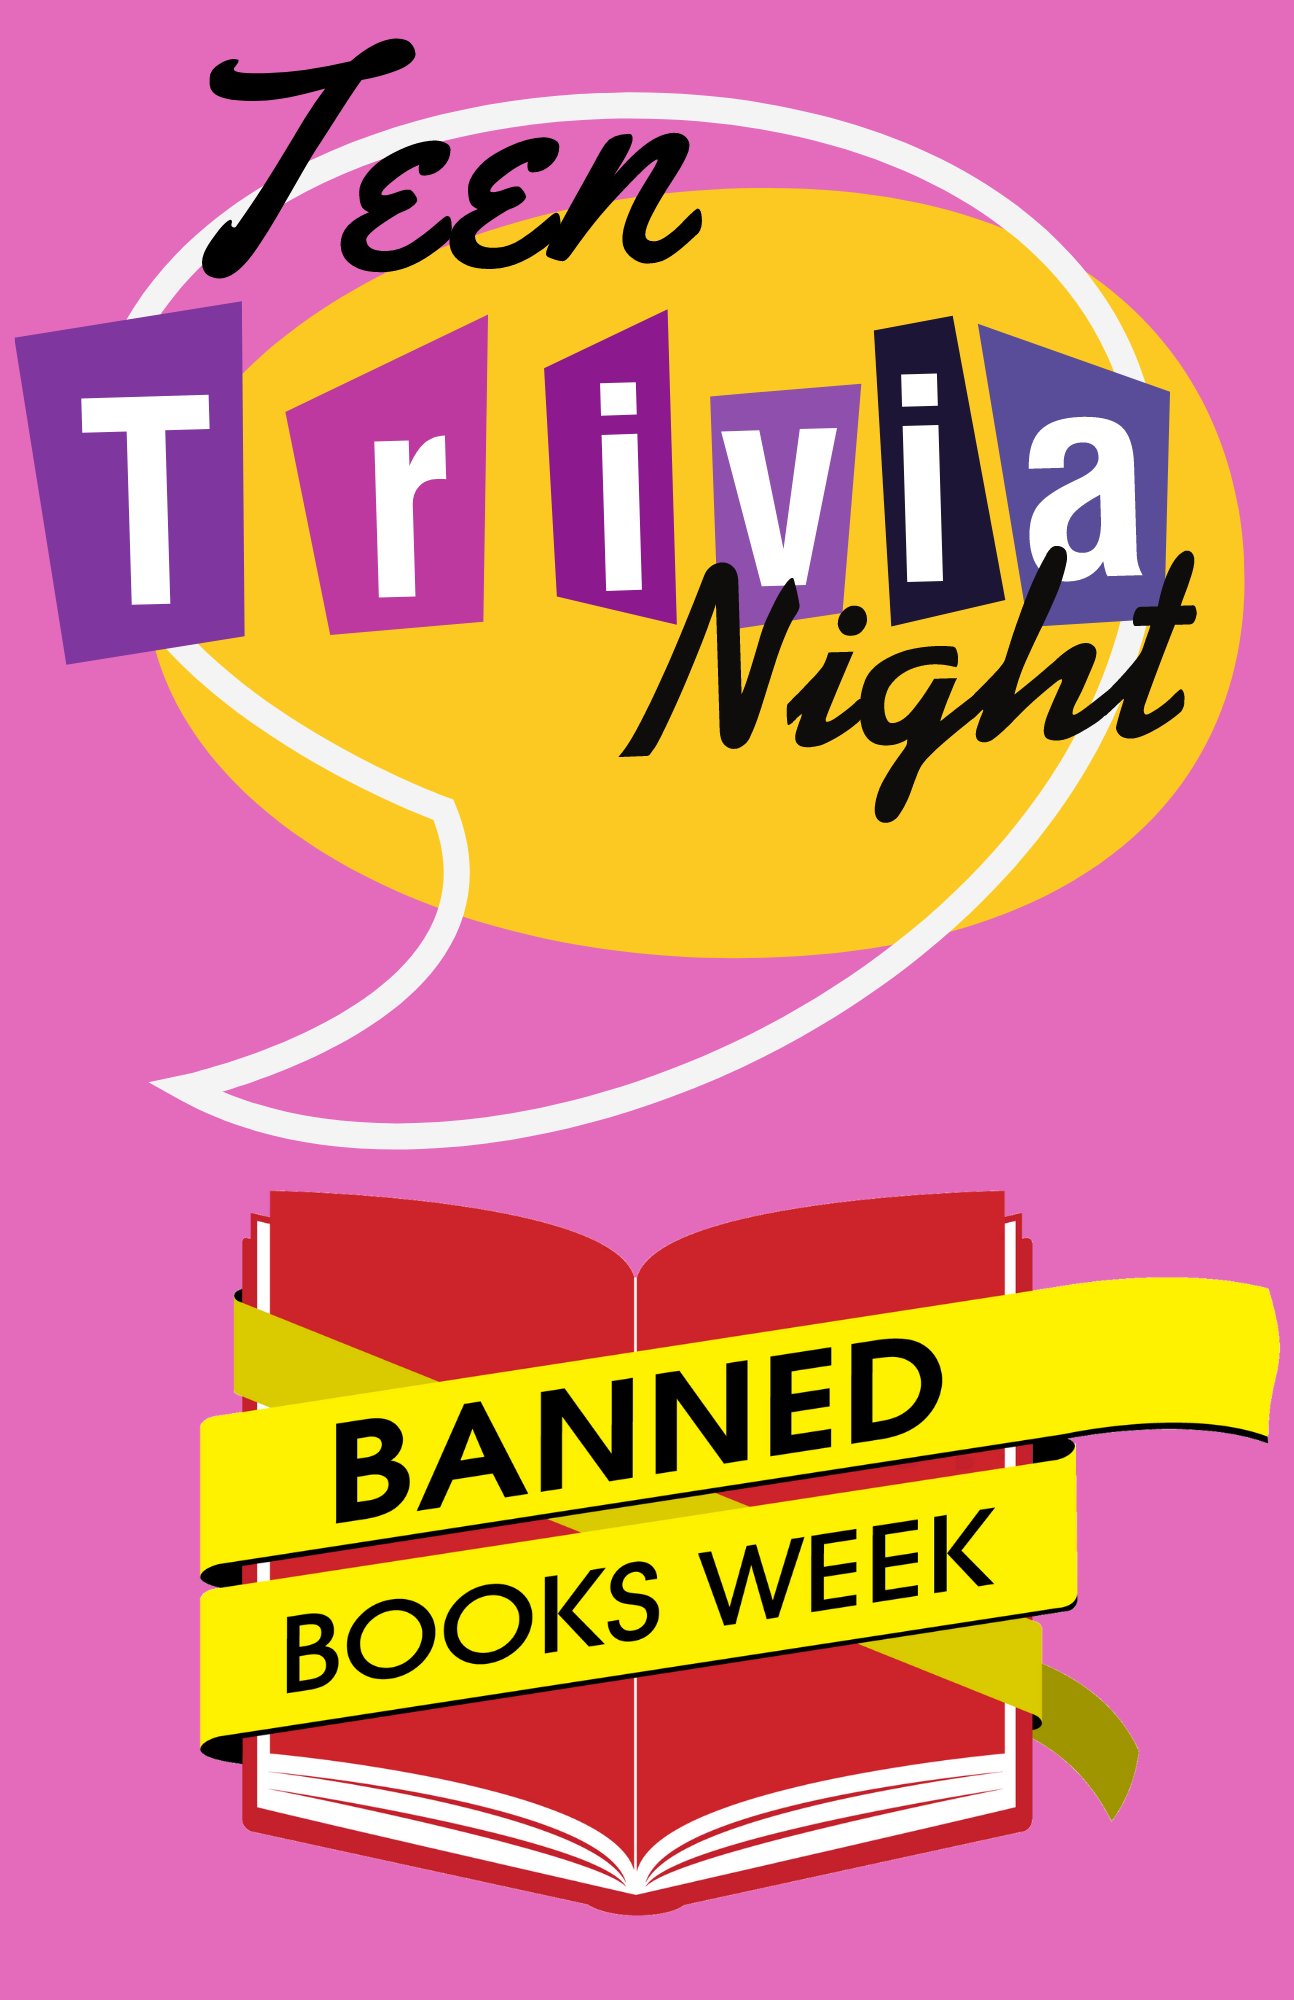 A yellow text blurb with "Teen Trivia Night" in retro style letters. A red book with yellow tape reading "Banned Books Week" is below.